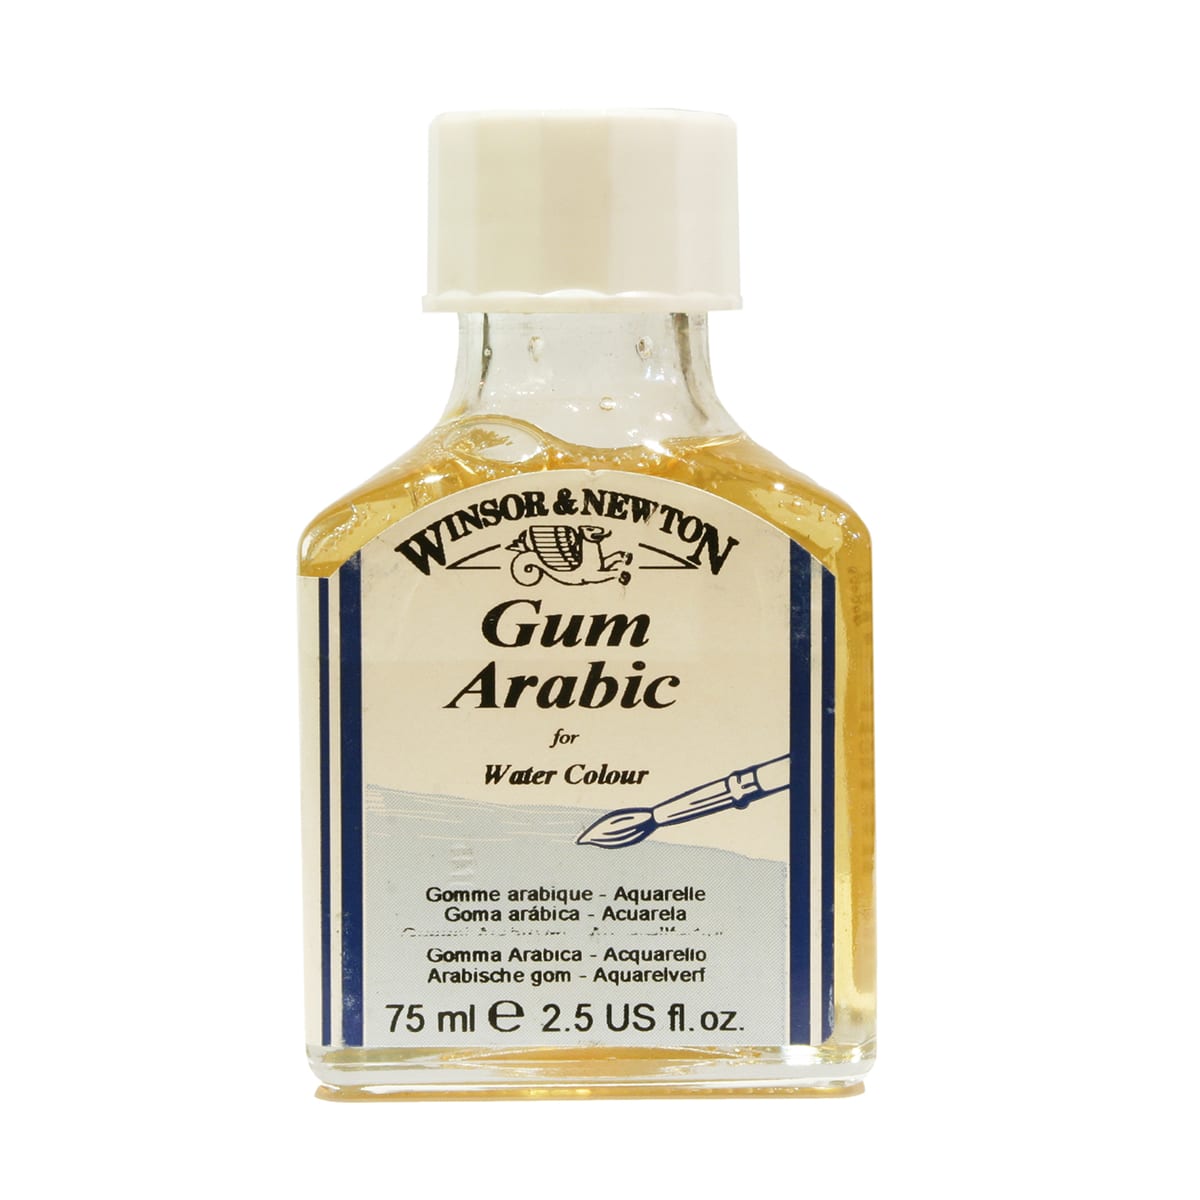 Can windsor and newton gum arabic liquid be used to make watercolor :  r/paintmakers